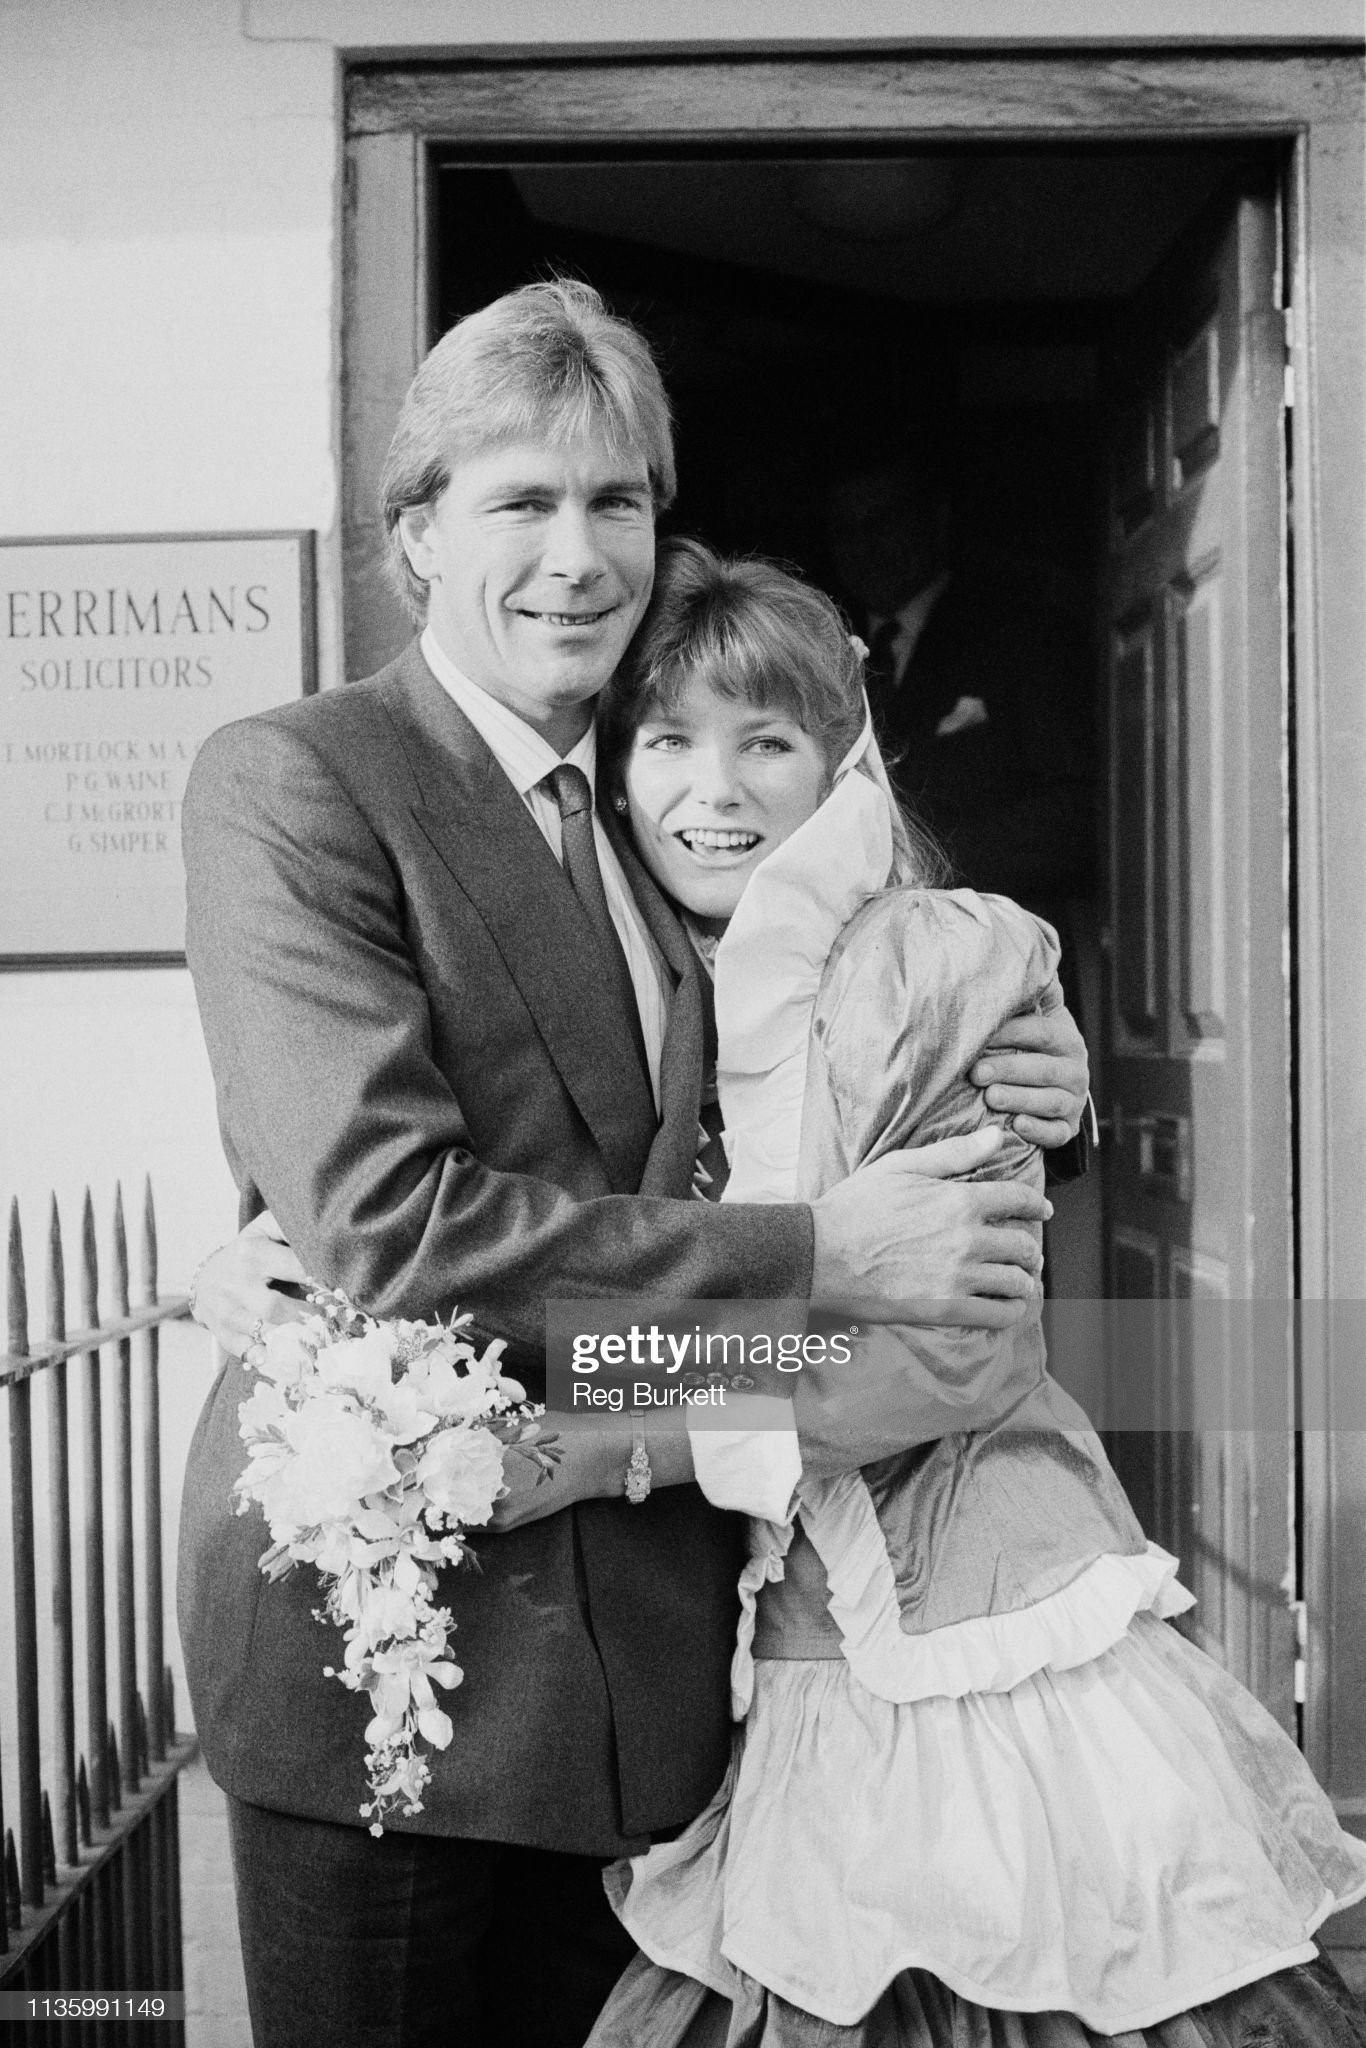 James Hunt and Sarah Lomax on their wedding day in Marlborough, UK, 17th December 1983. 